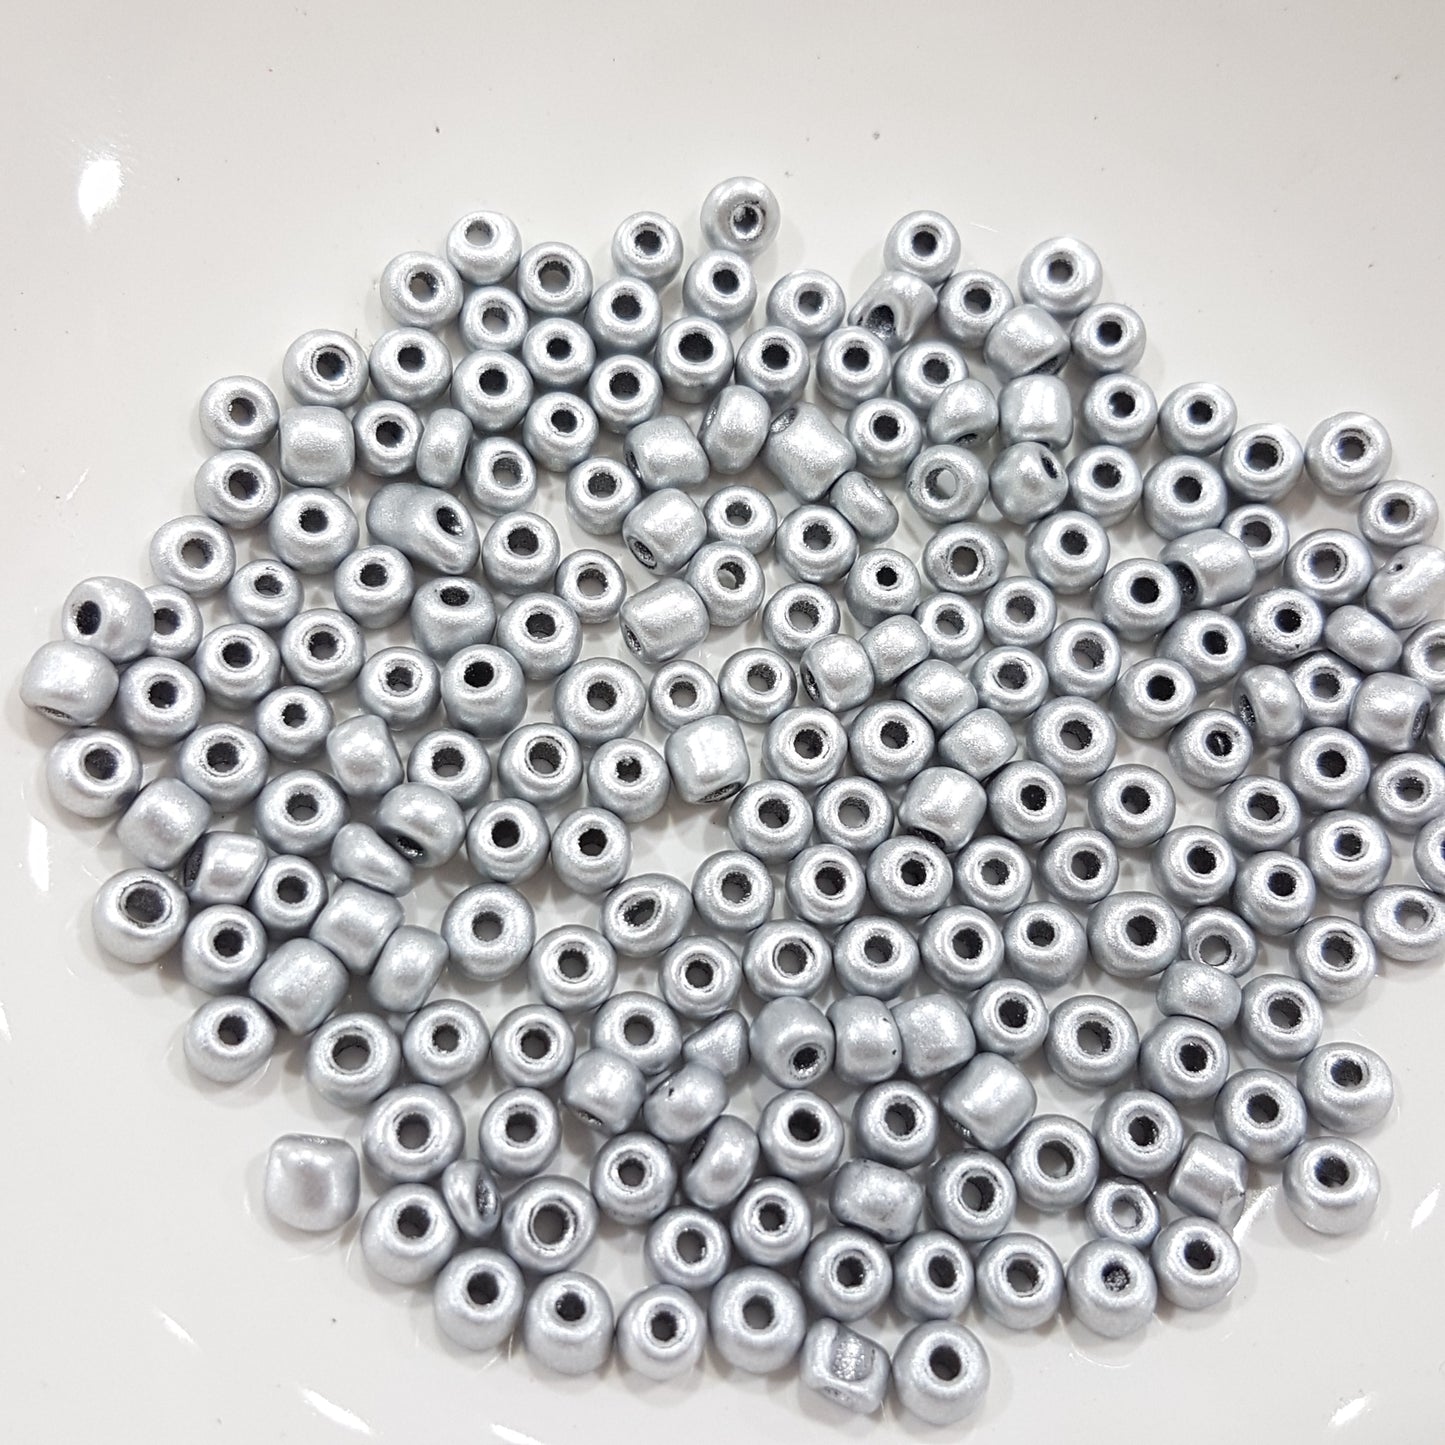 15g 6/0 Silver Painted Seed Beads